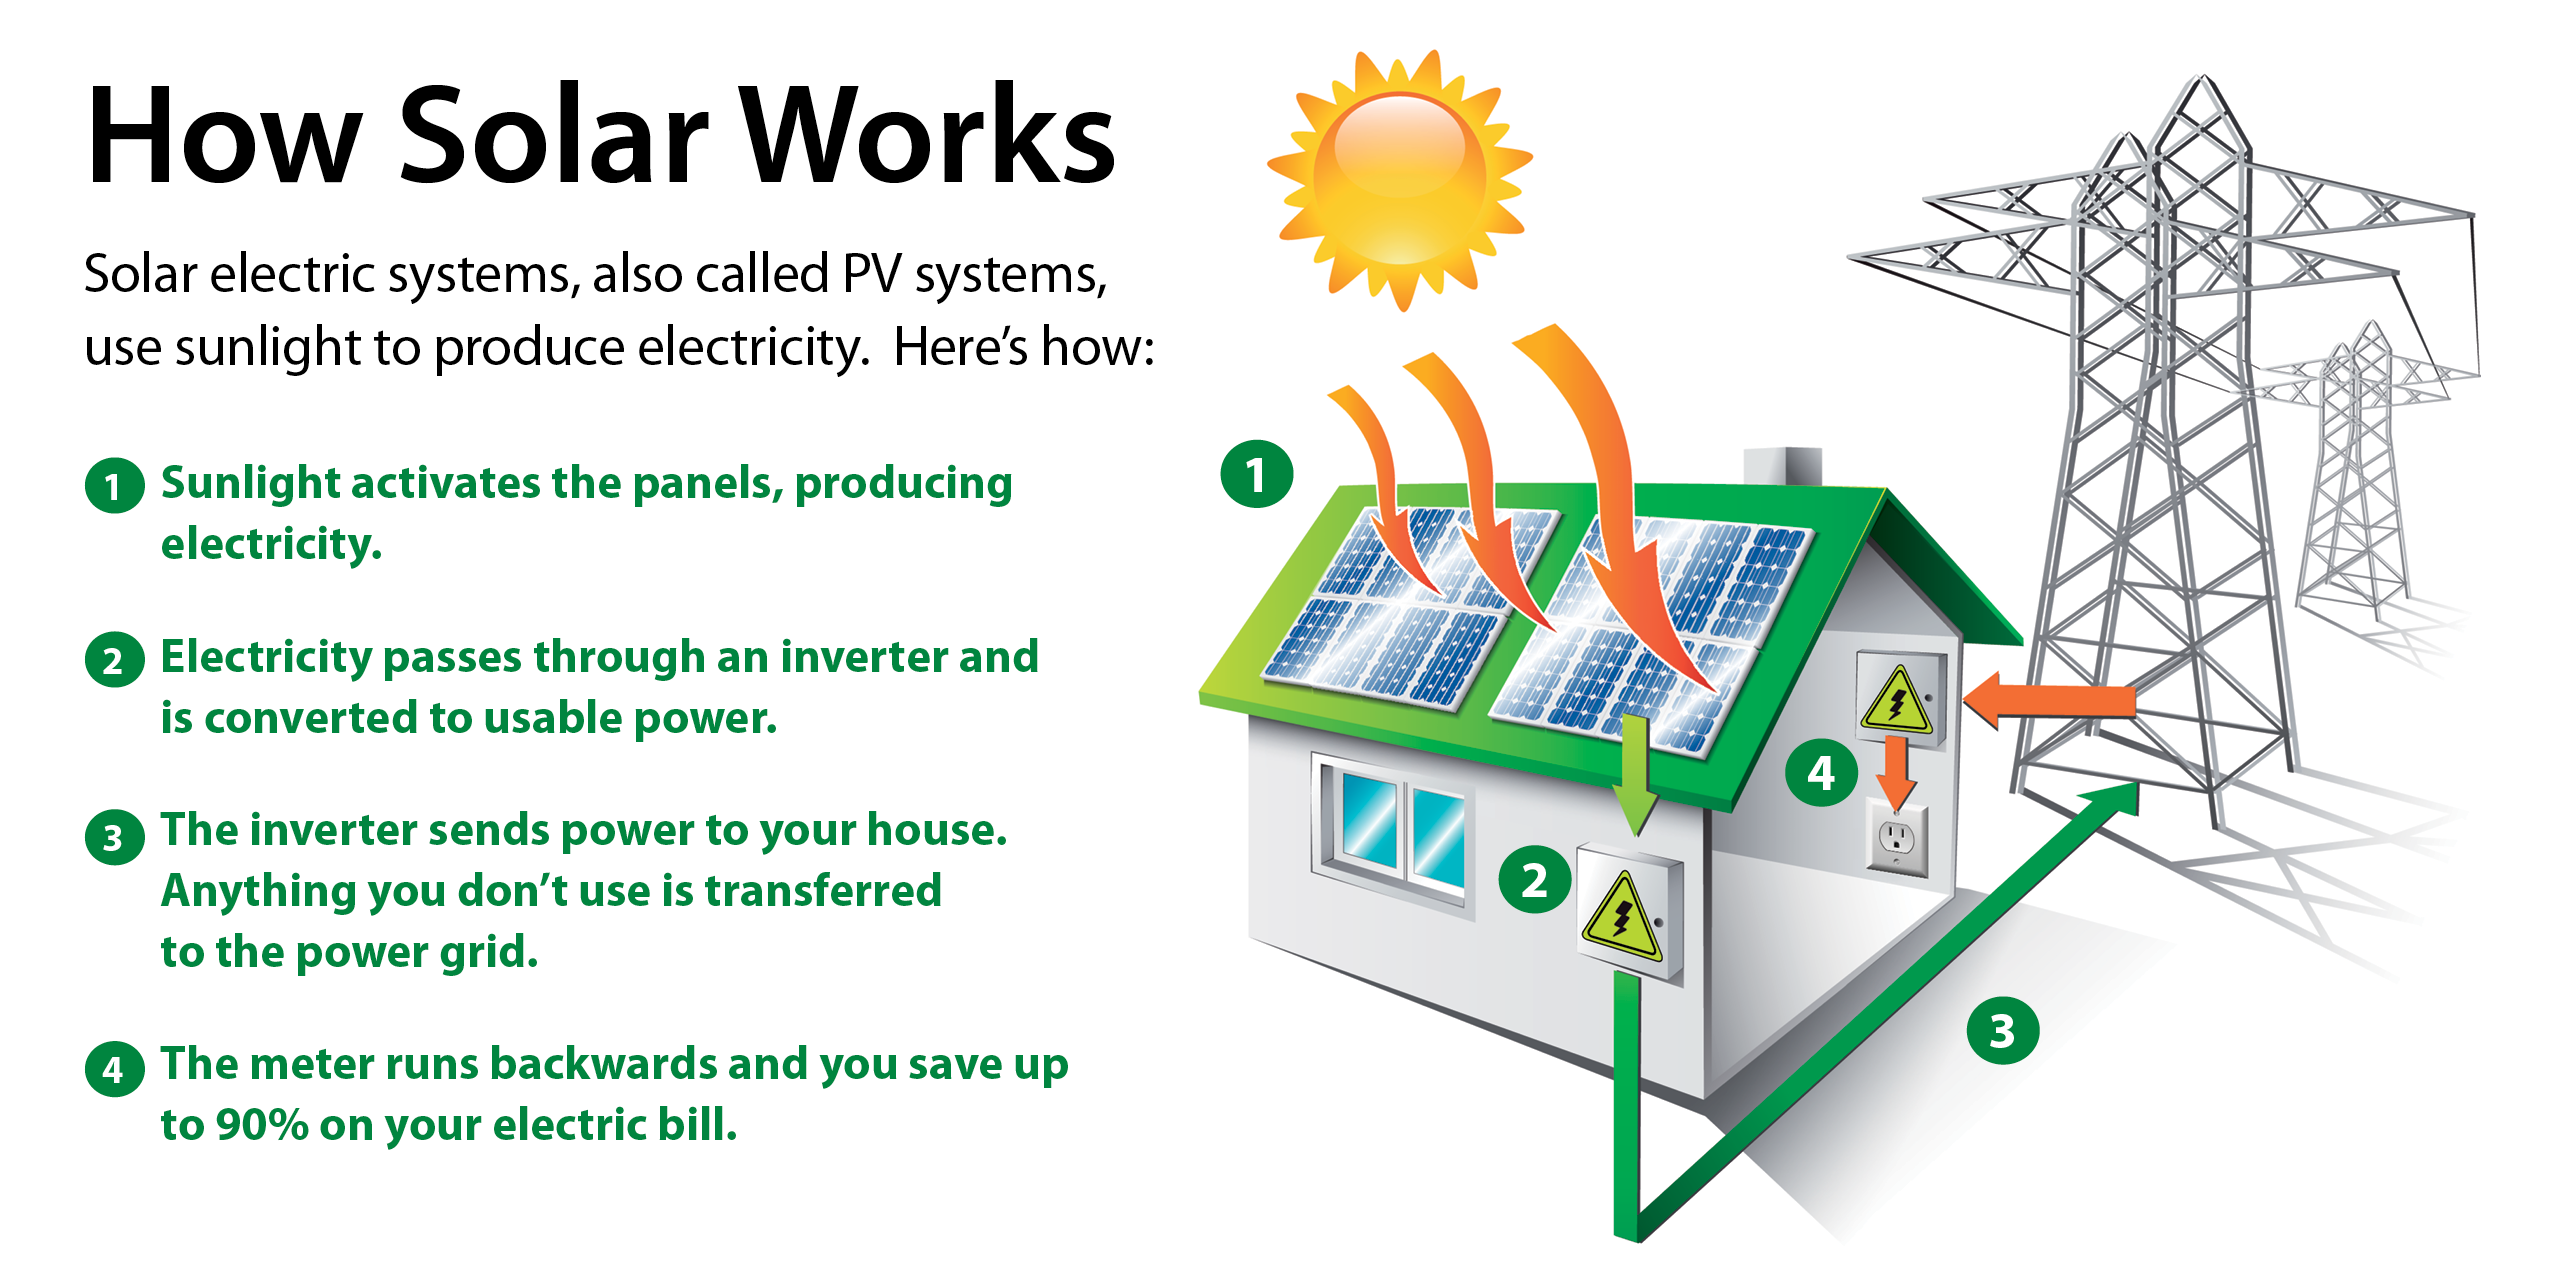 How to how energy. Solar Energy how it works. How does Solar Energy work. Solar Energy: how does it work?. How does Solar Energy works.